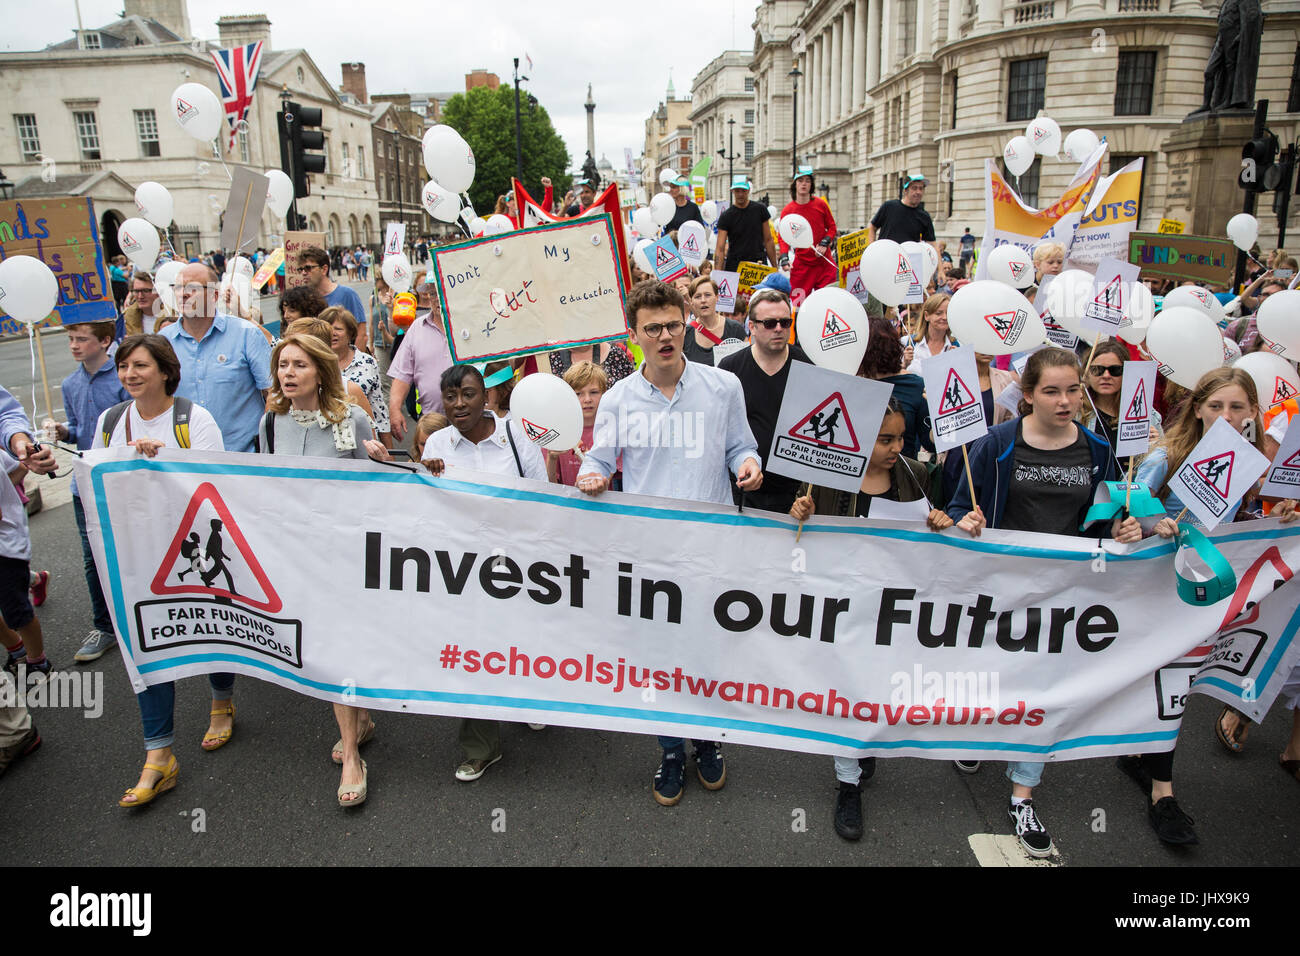 London, UK. 16th July, 2017. Campaigners against cuts to education funding and their families march to Parliament Square as part of a Carnival Against The Cuts protest organised by Fair Funding For All Schools. Credit: Mark Kerrison/Alamy Live News Stock Photo